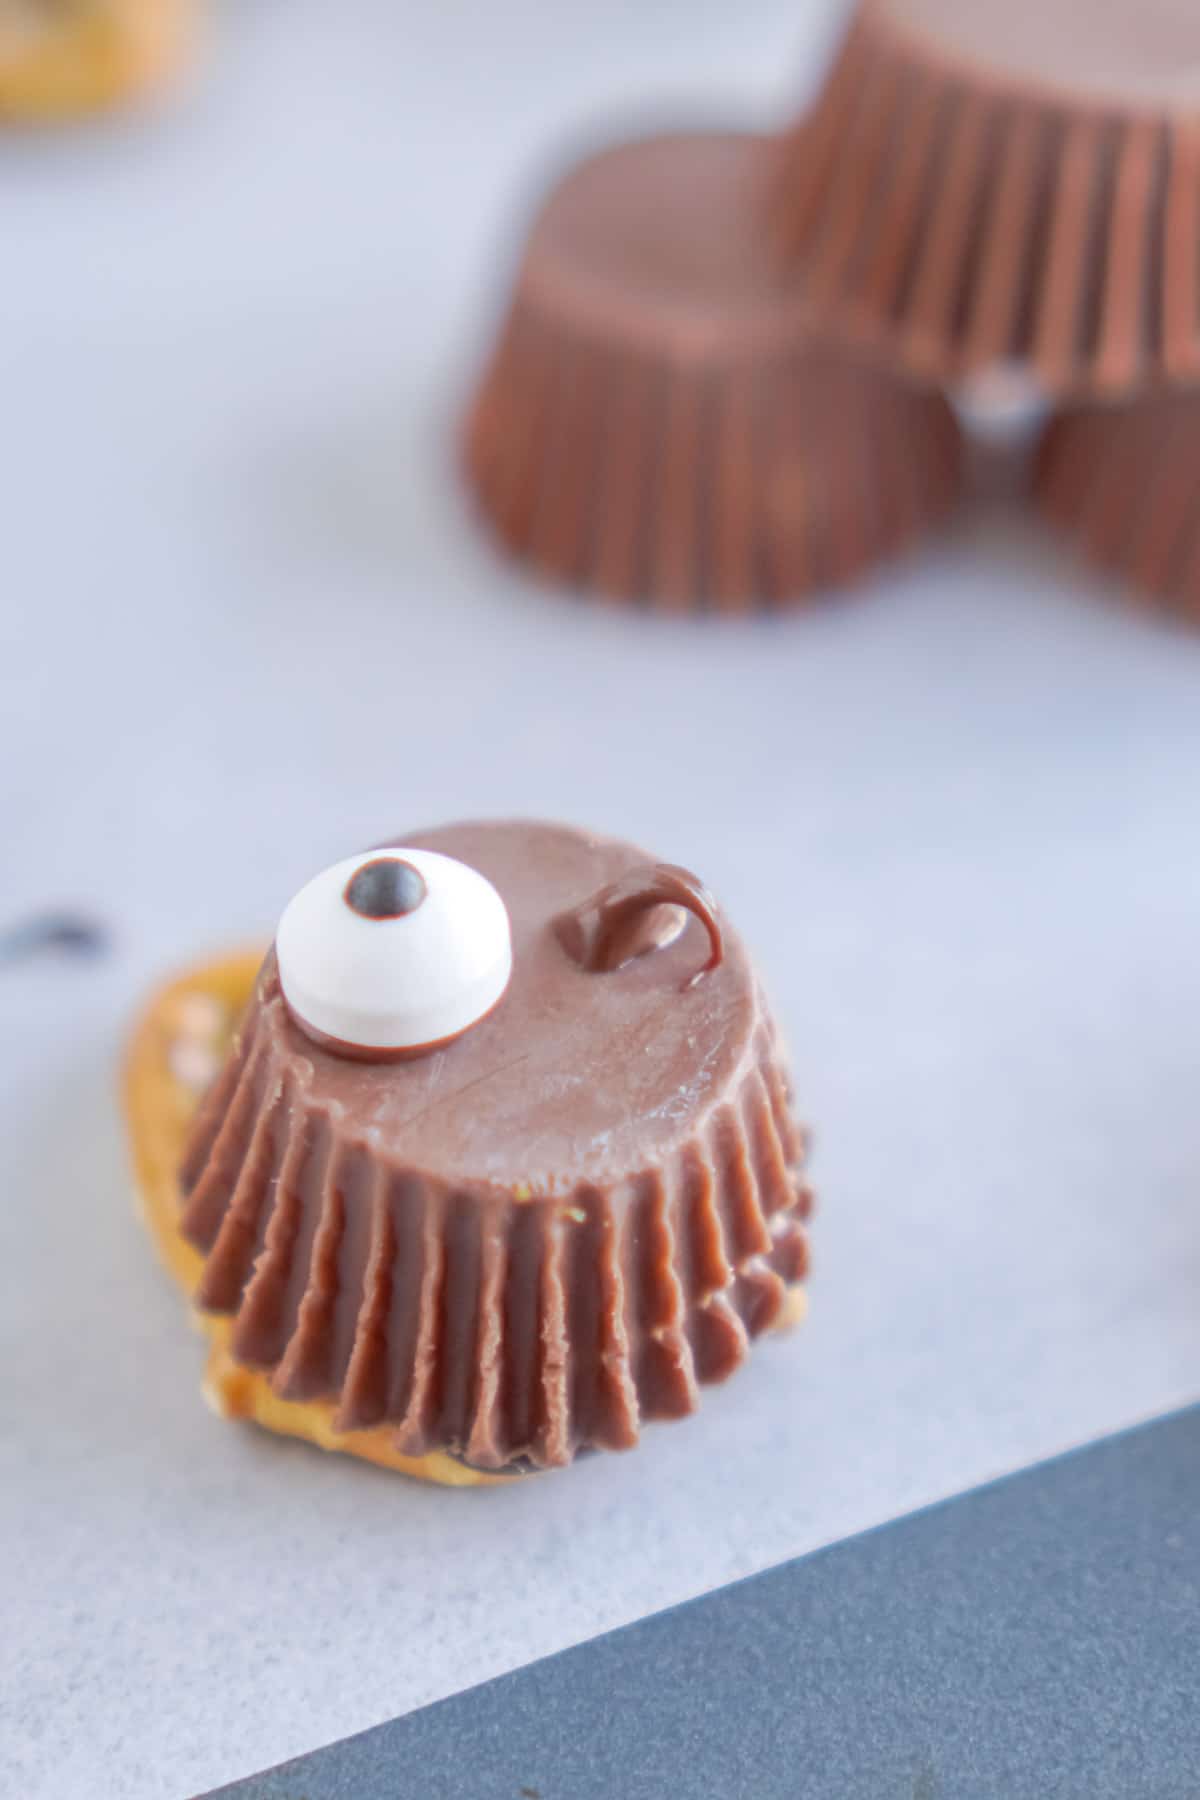 Reese's Peanut Butter cup with candy eye on top